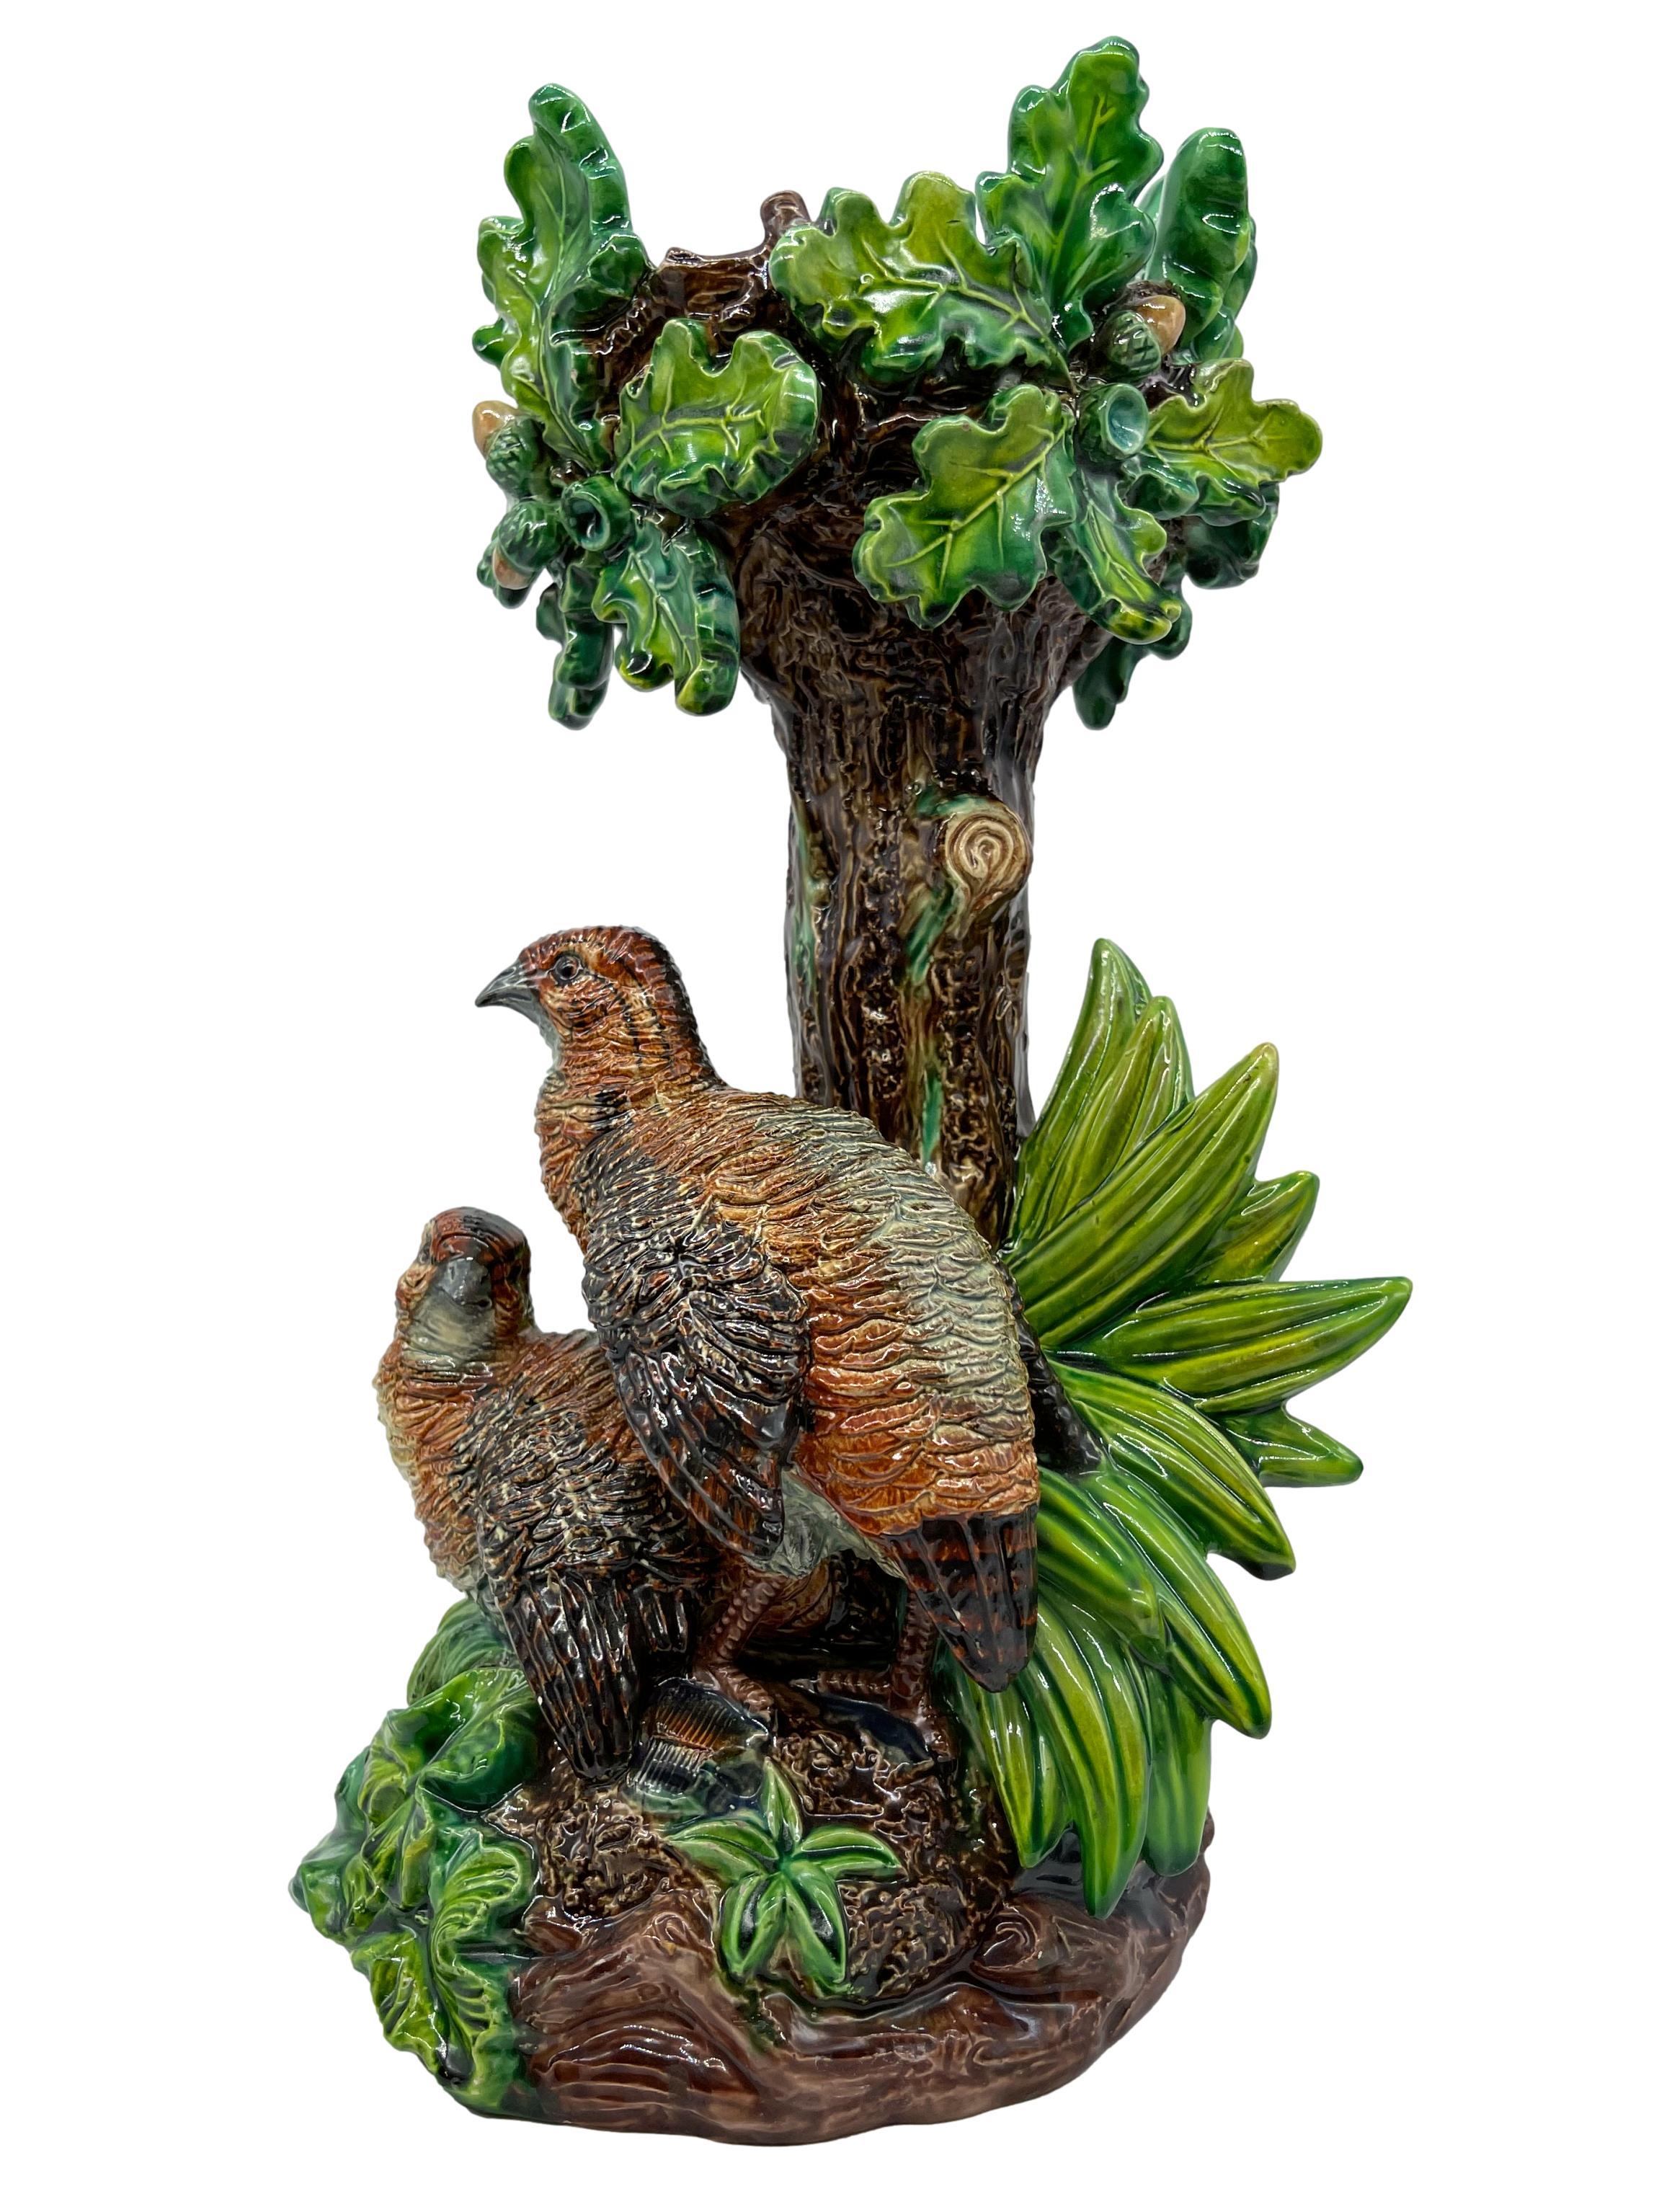 Hugo Lonitz Majolica figural table Jardinière stand, naturalistically molded as an oak tree, with a pair of partridges nesting among bulrushes and grasses, on a rustic mound-form, log and rockwork base, the reverse with impressed marks: Hugo Lonitz